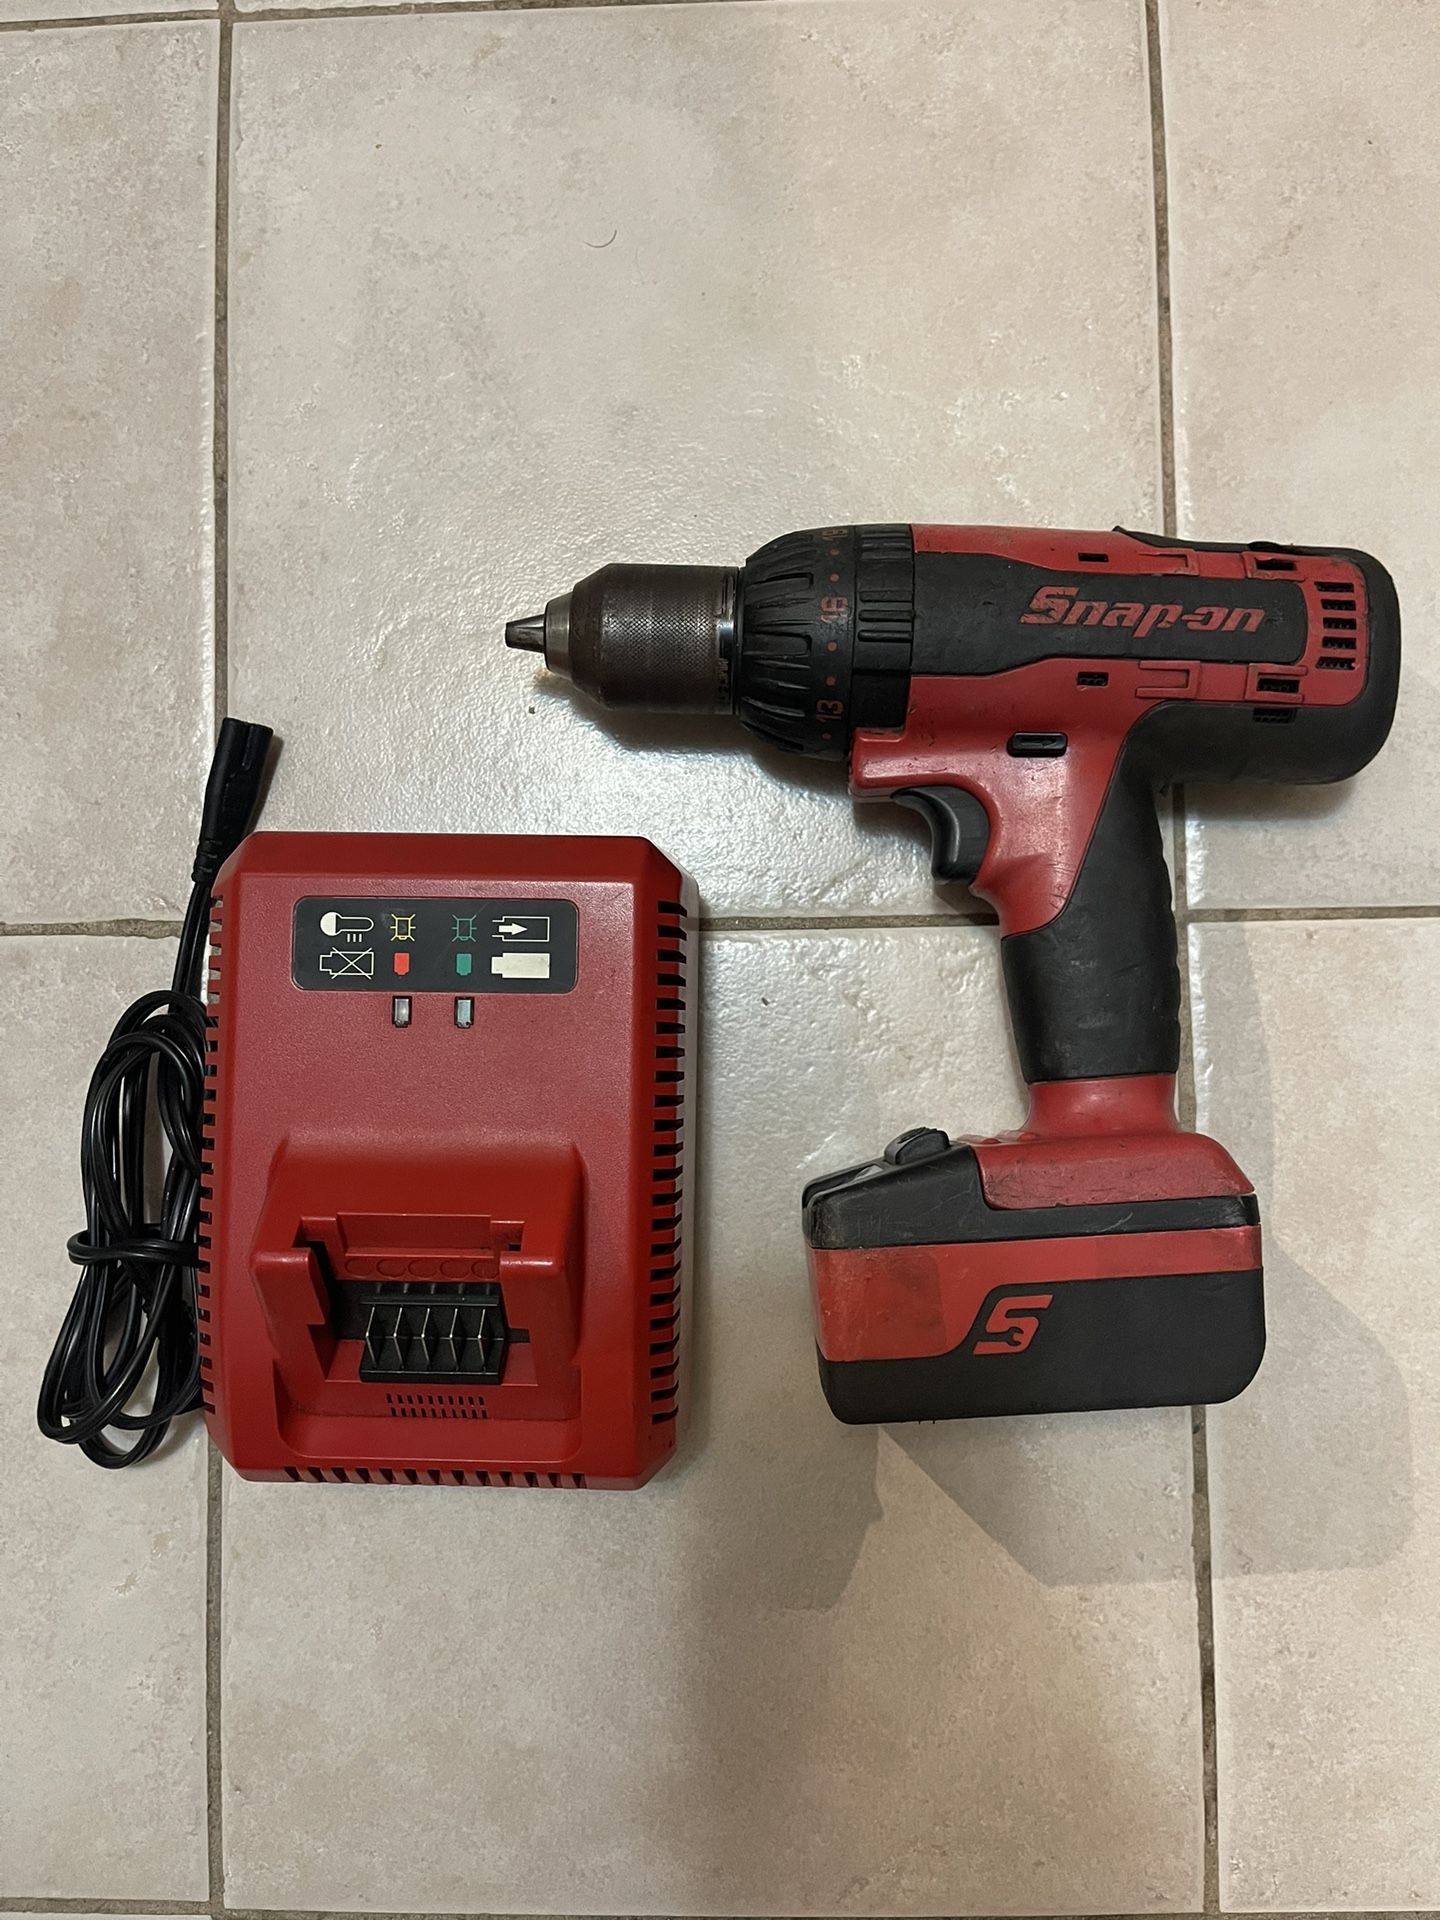 SNAPON CDR8850H CORDLESS CTB8185 HAMMER MONSTER LITHIUM ION DRILL 1/2" SNAP ON SNAP-ON 18V CHARGER BATTERY CTC720